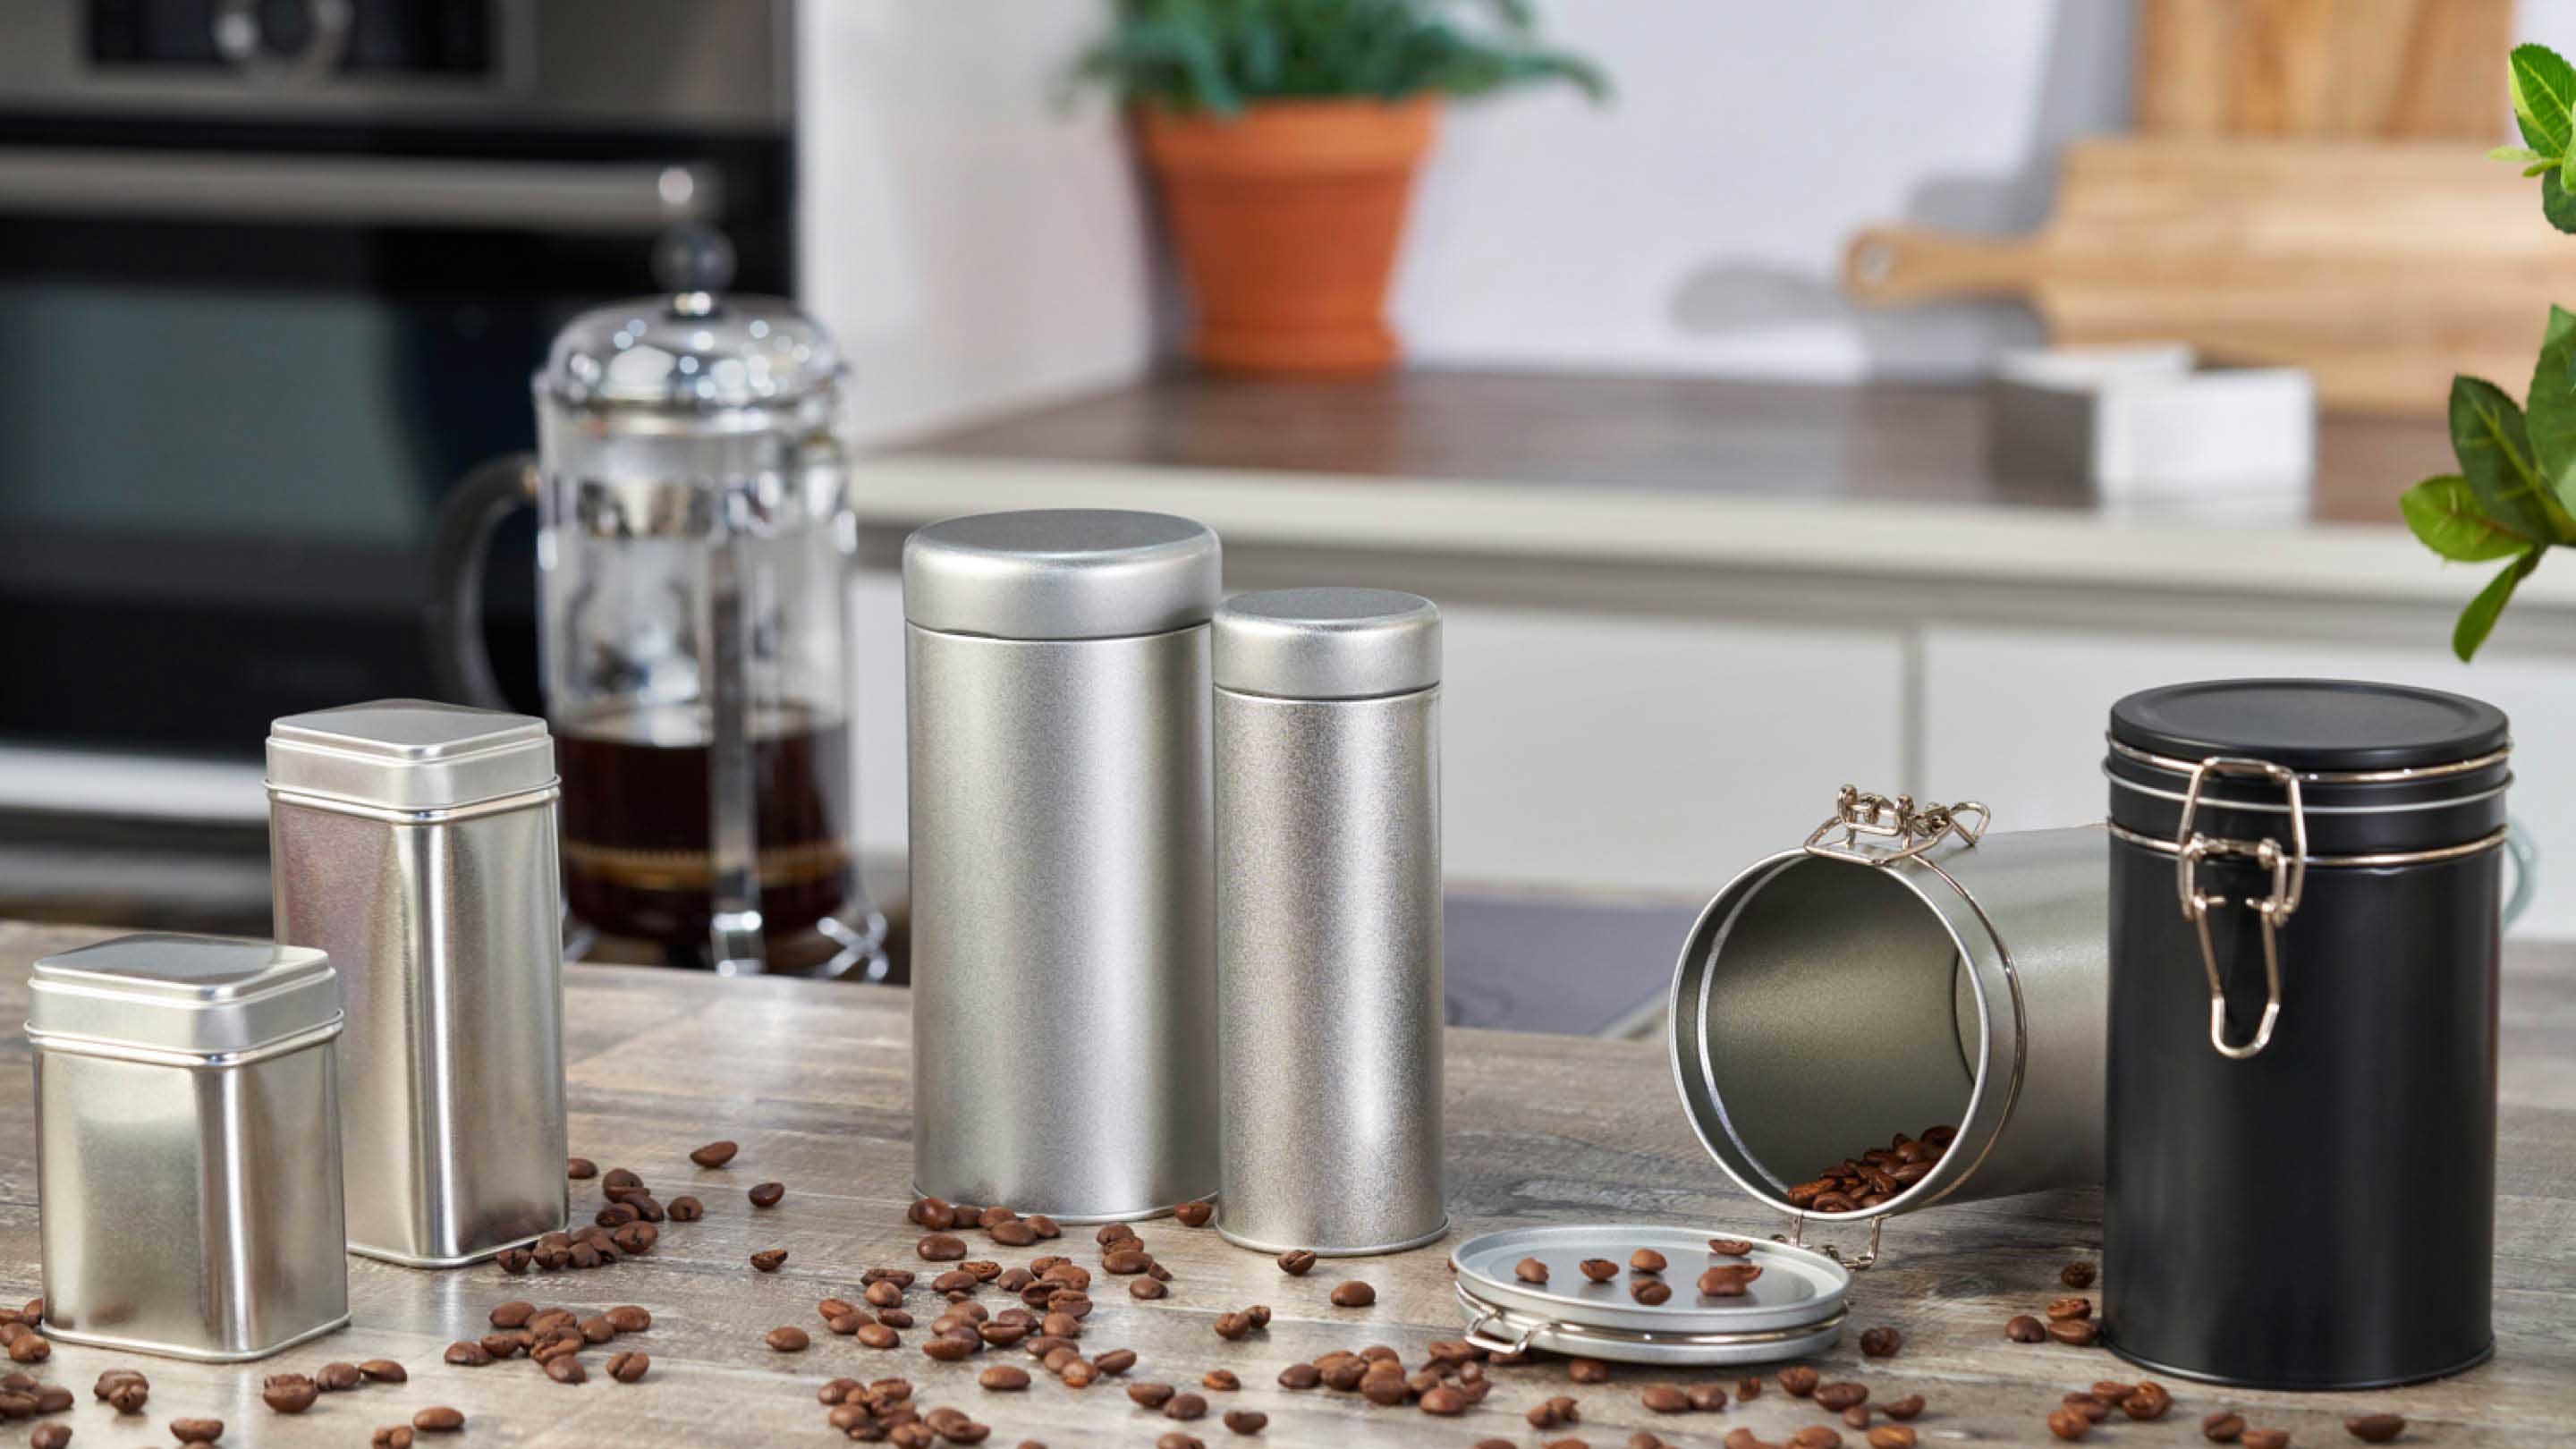 A range of metal packaging containers used for coffee, spices and herbs in a kitchen setting.